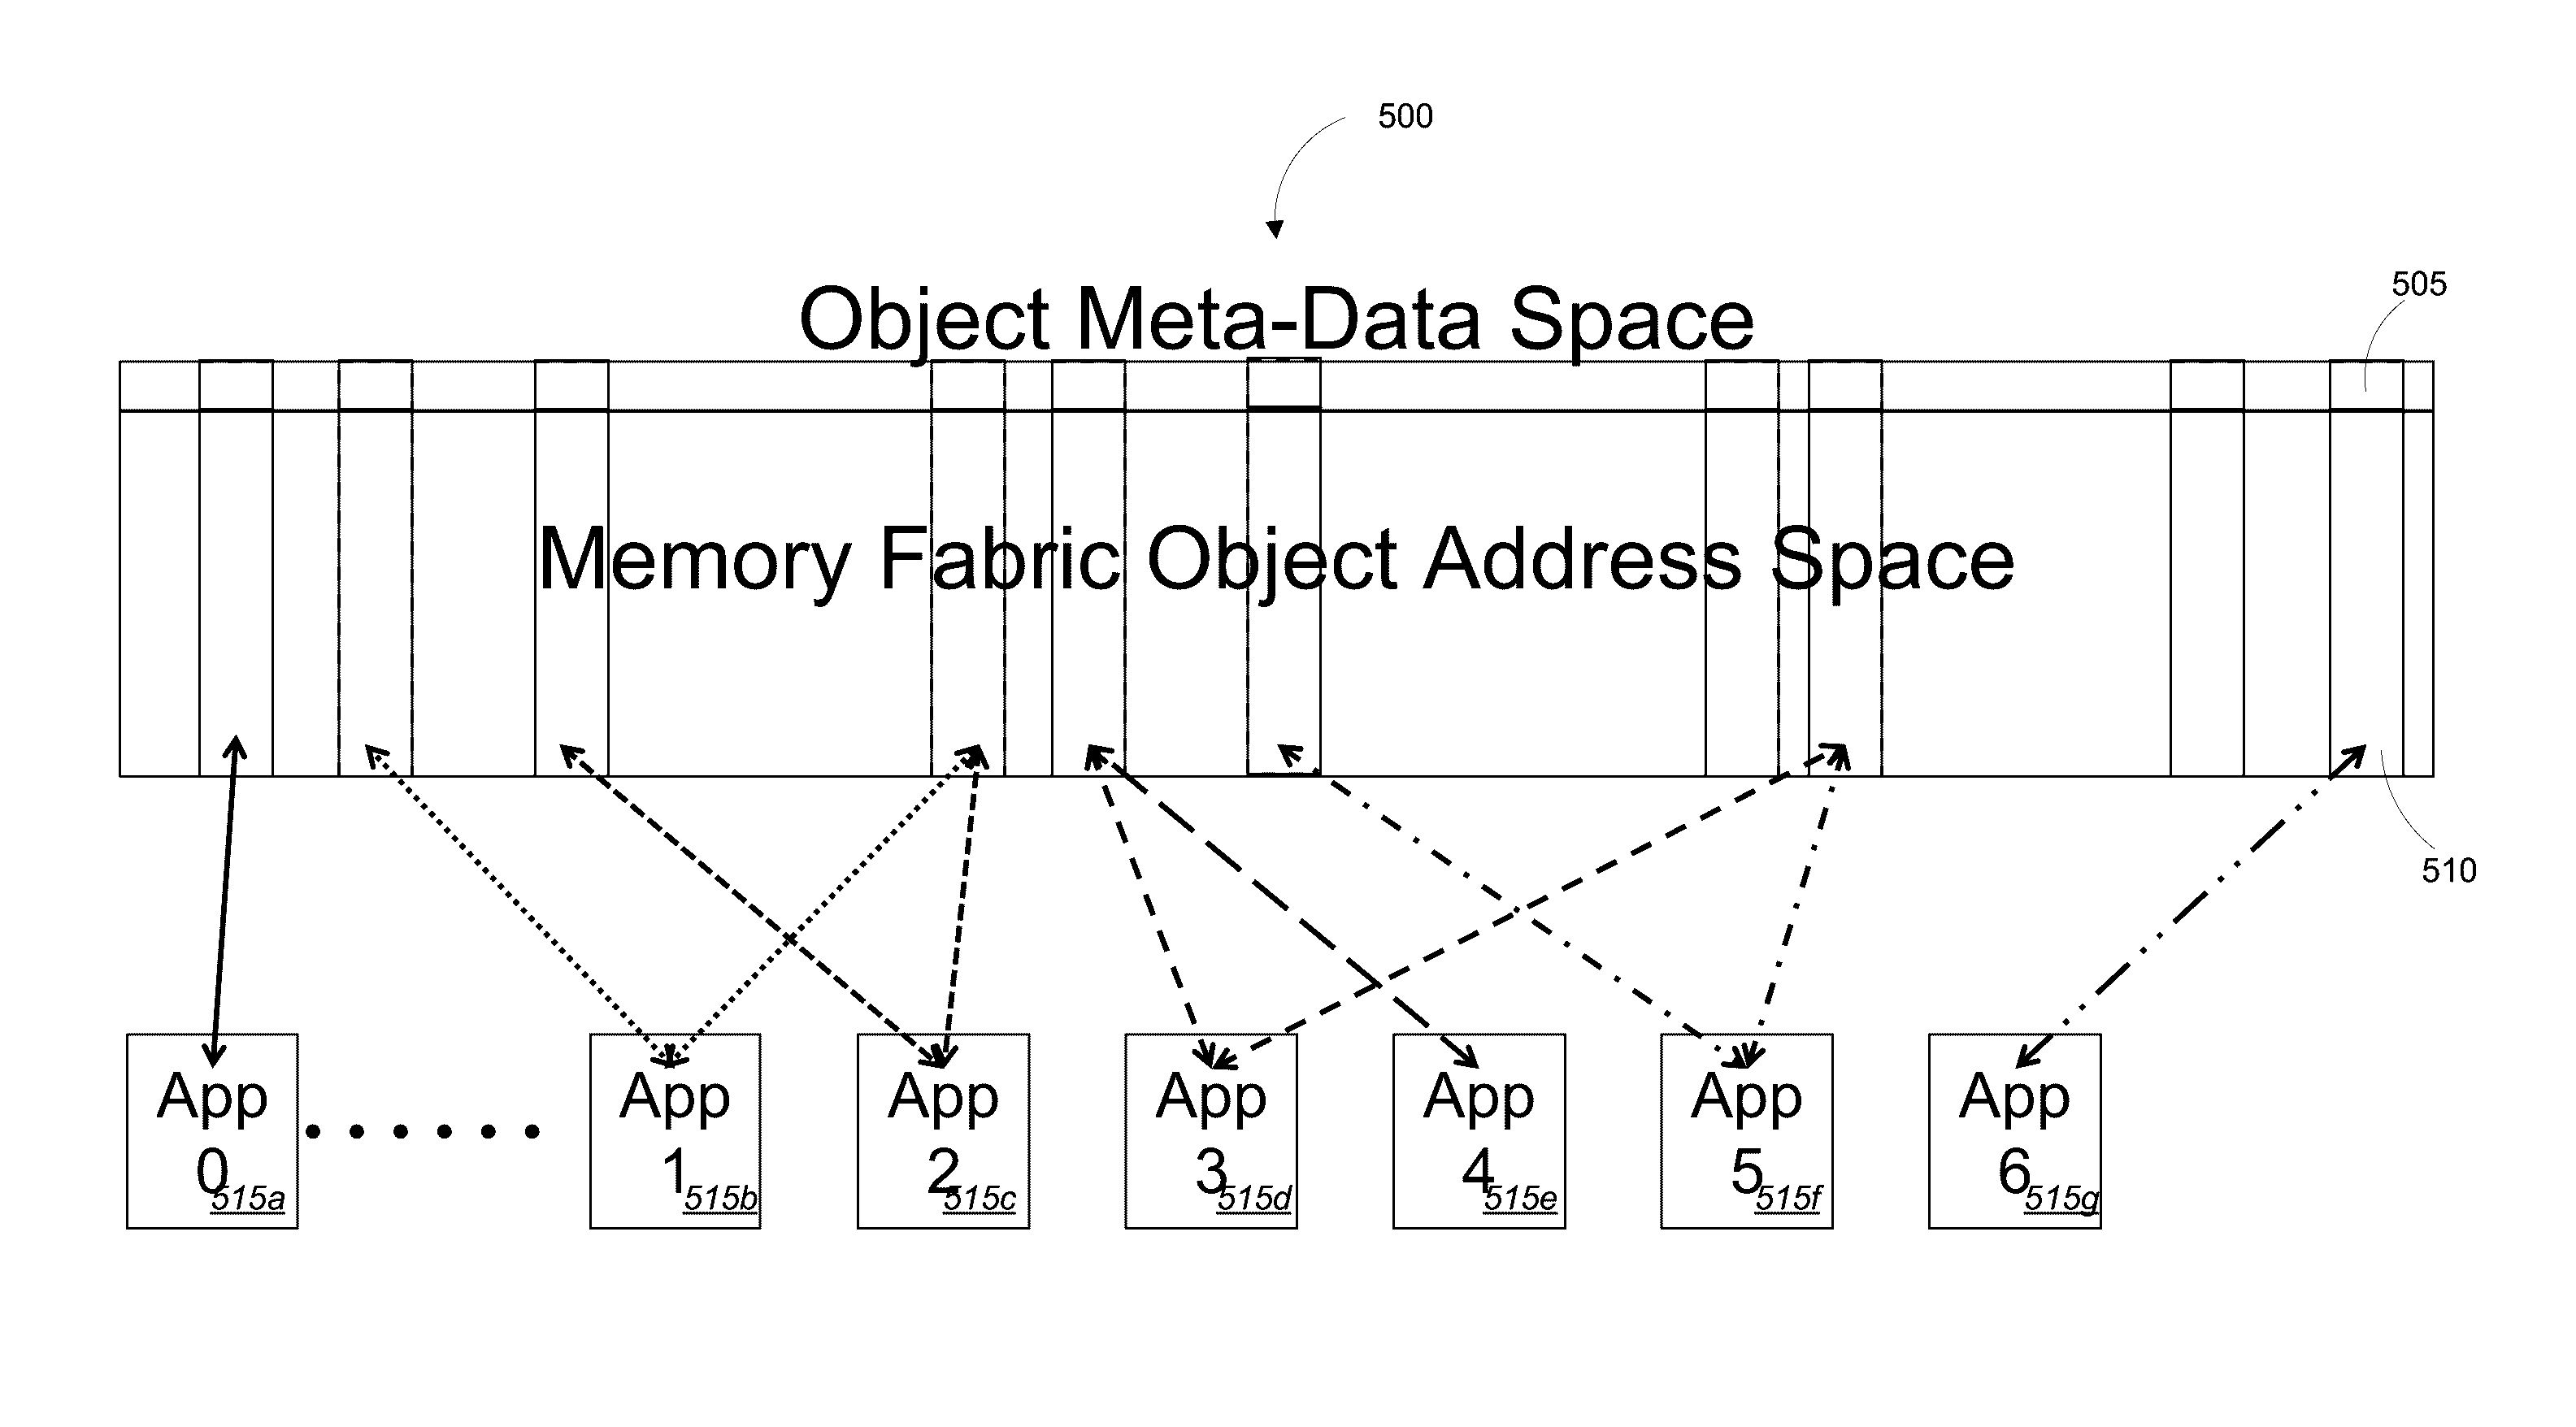 Infinite memory fabric hardware implementation with memory